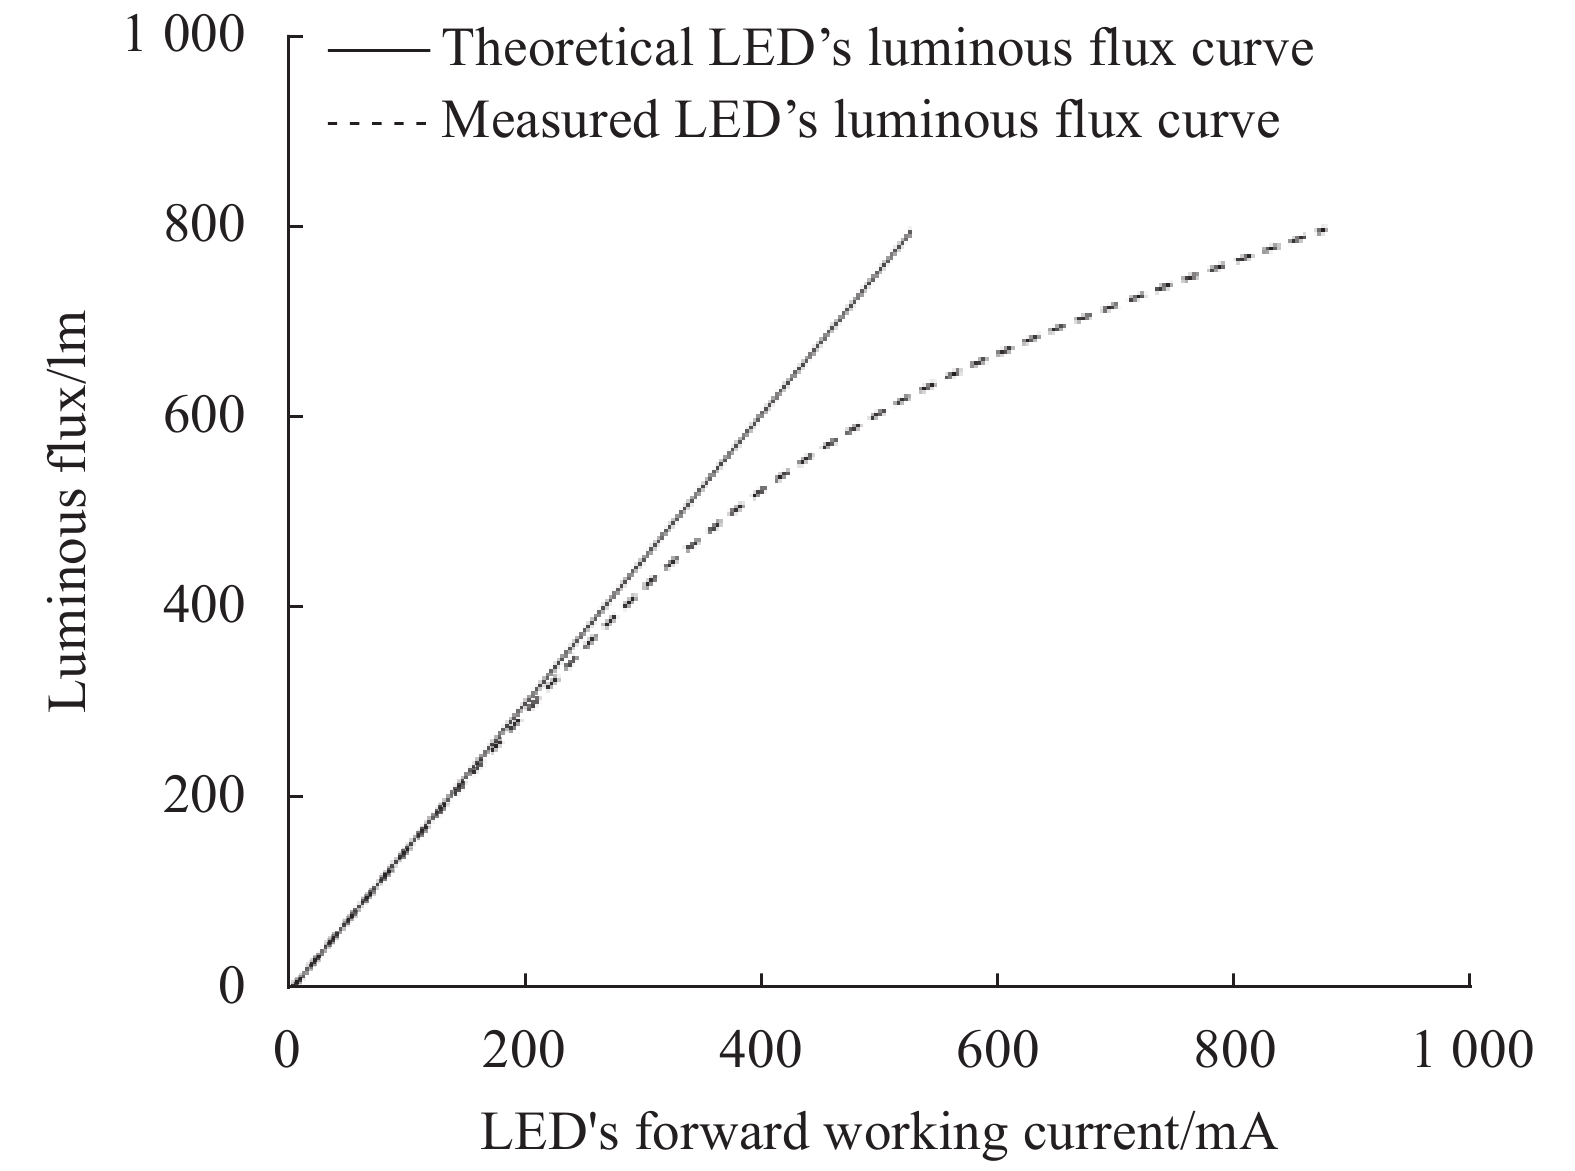 Relationship curves of LED’s luminous flux and forward working current